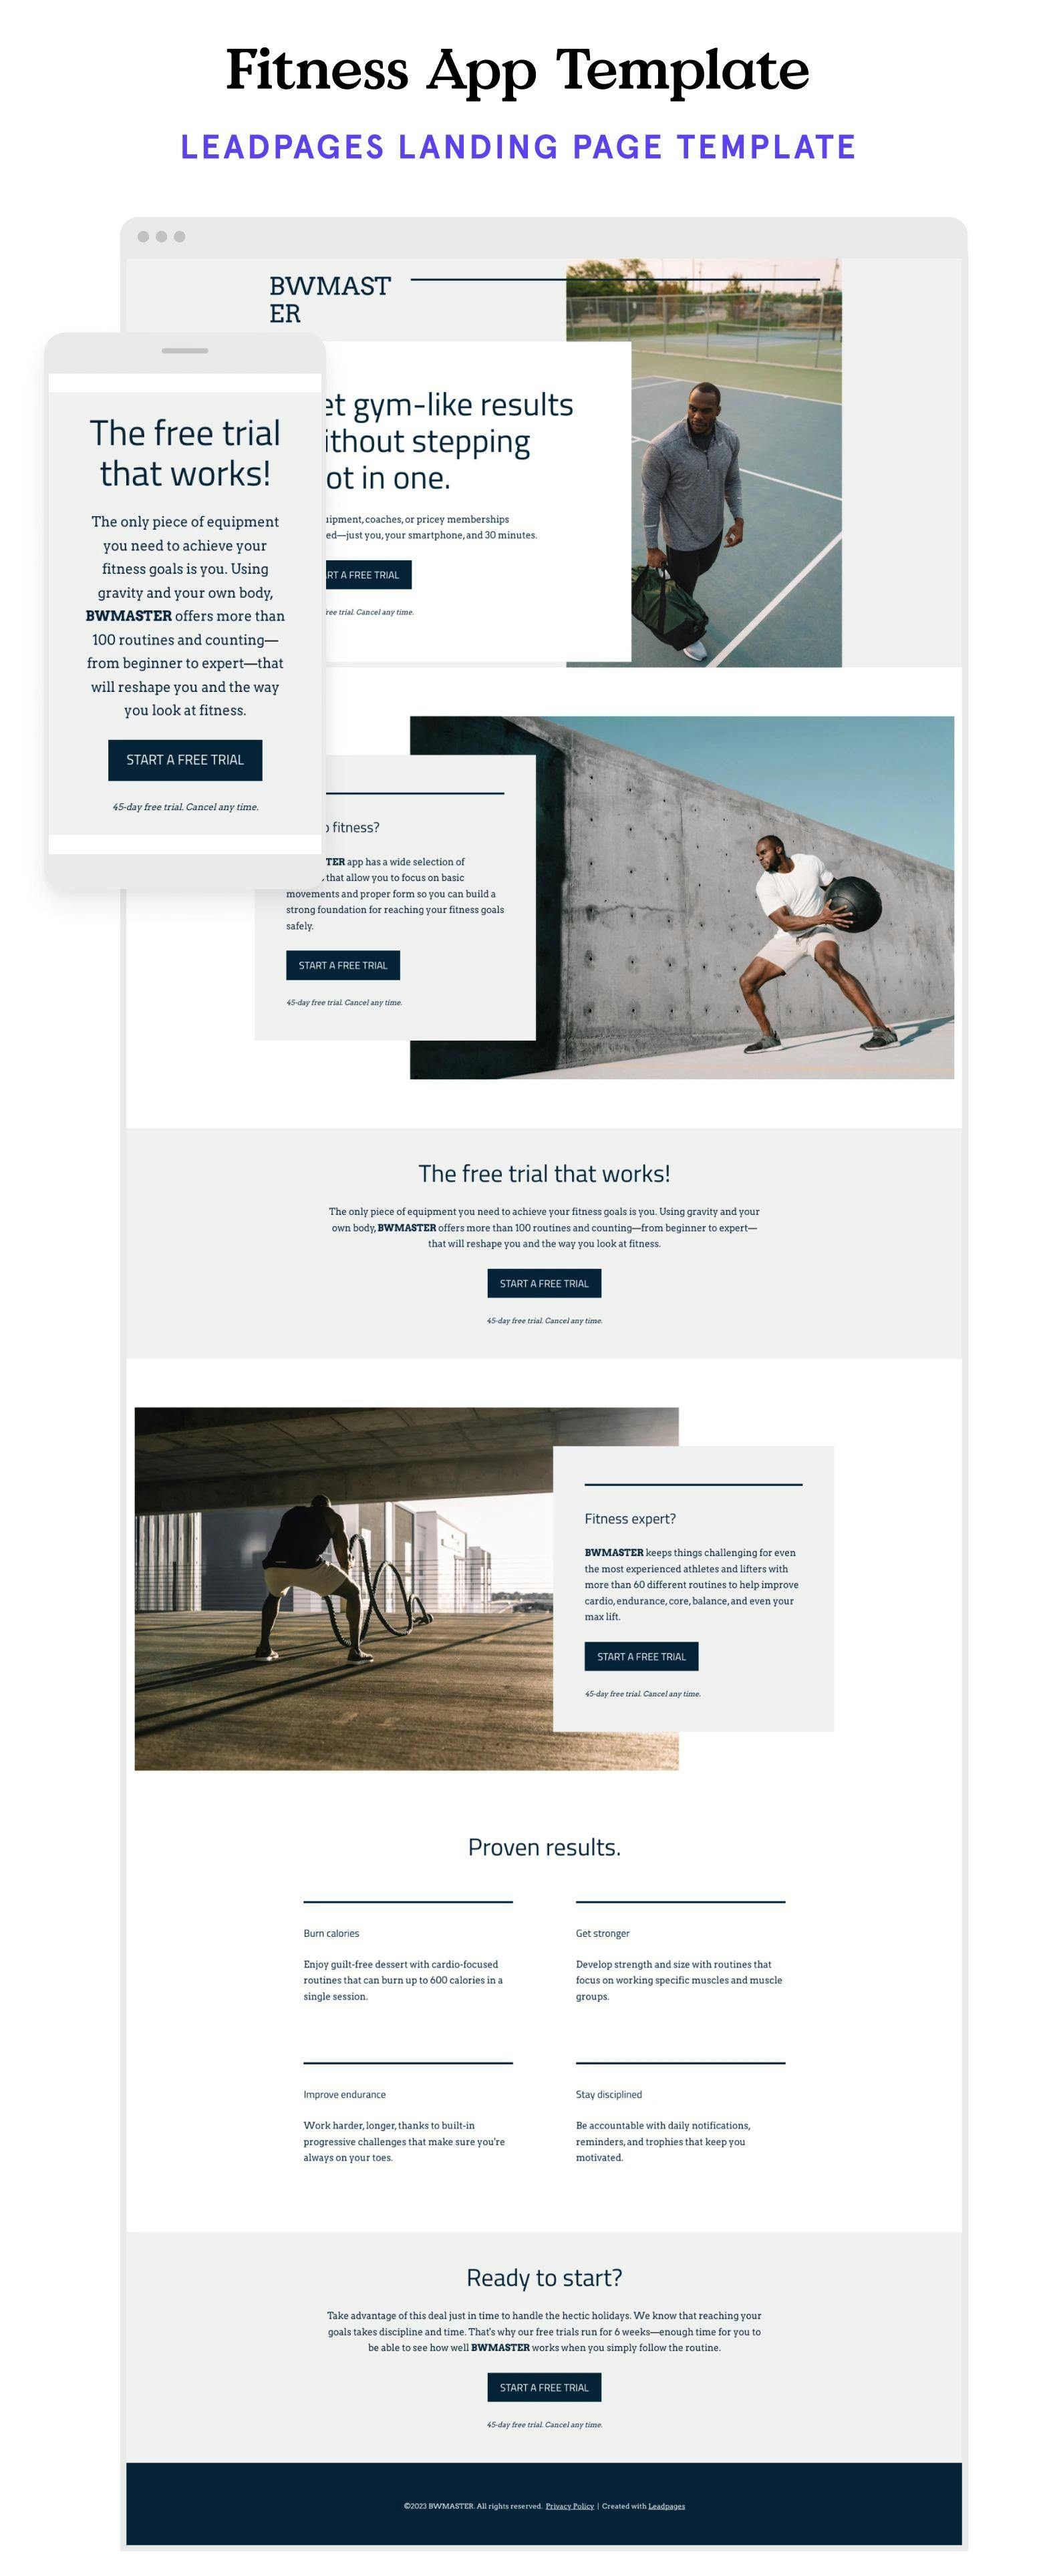 App fitness landing page template